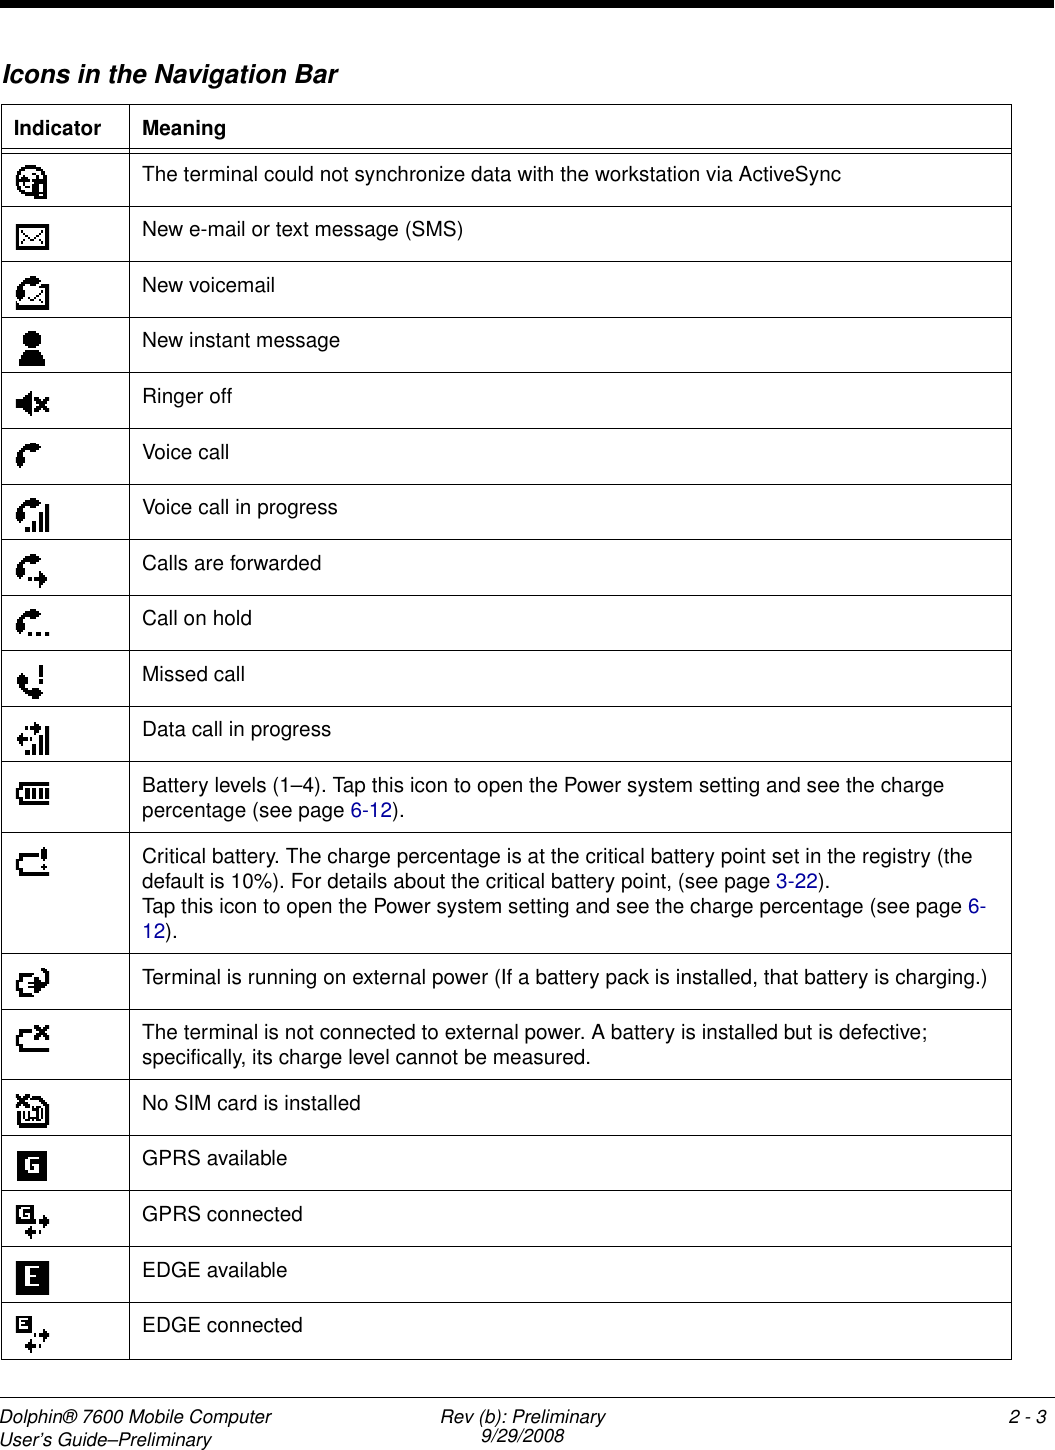 Dolphin® 7600 Mobile Computer User’s Guide–Preliminary Rev (b): Preliminary9/29/2008 2 - 3Icons in the Navigation BarIndicator MeaningThe terminal could not synchronize data with the workstation via ActiveSyncNew e-mail or text message (SMS)New voicemailNew instant messageRinger offVoice callVoice call in progressCalls are forwardedCall on holdMissed callData call in progressBattery levels (1–4). Tap this icon to open the Power system setting and see the charge percentage (see page 6-12).Critical battery. The charge percentage is at the critical battery point set in the registry (the default is 10%). For details about the critical battery point, (see page 3-22).Tap this icon to open the Power system setting and see the charge percentage (see page 6-12).Terminal is running on external power (If a battery pack is installed, that battery is charging.)The terminal is not connected to external power. A battery is installed but is defective; specifically, its charge level cannot be measured.No SIM card is installed GPRS availableGPRS connectedEDGE availableEDGE connected